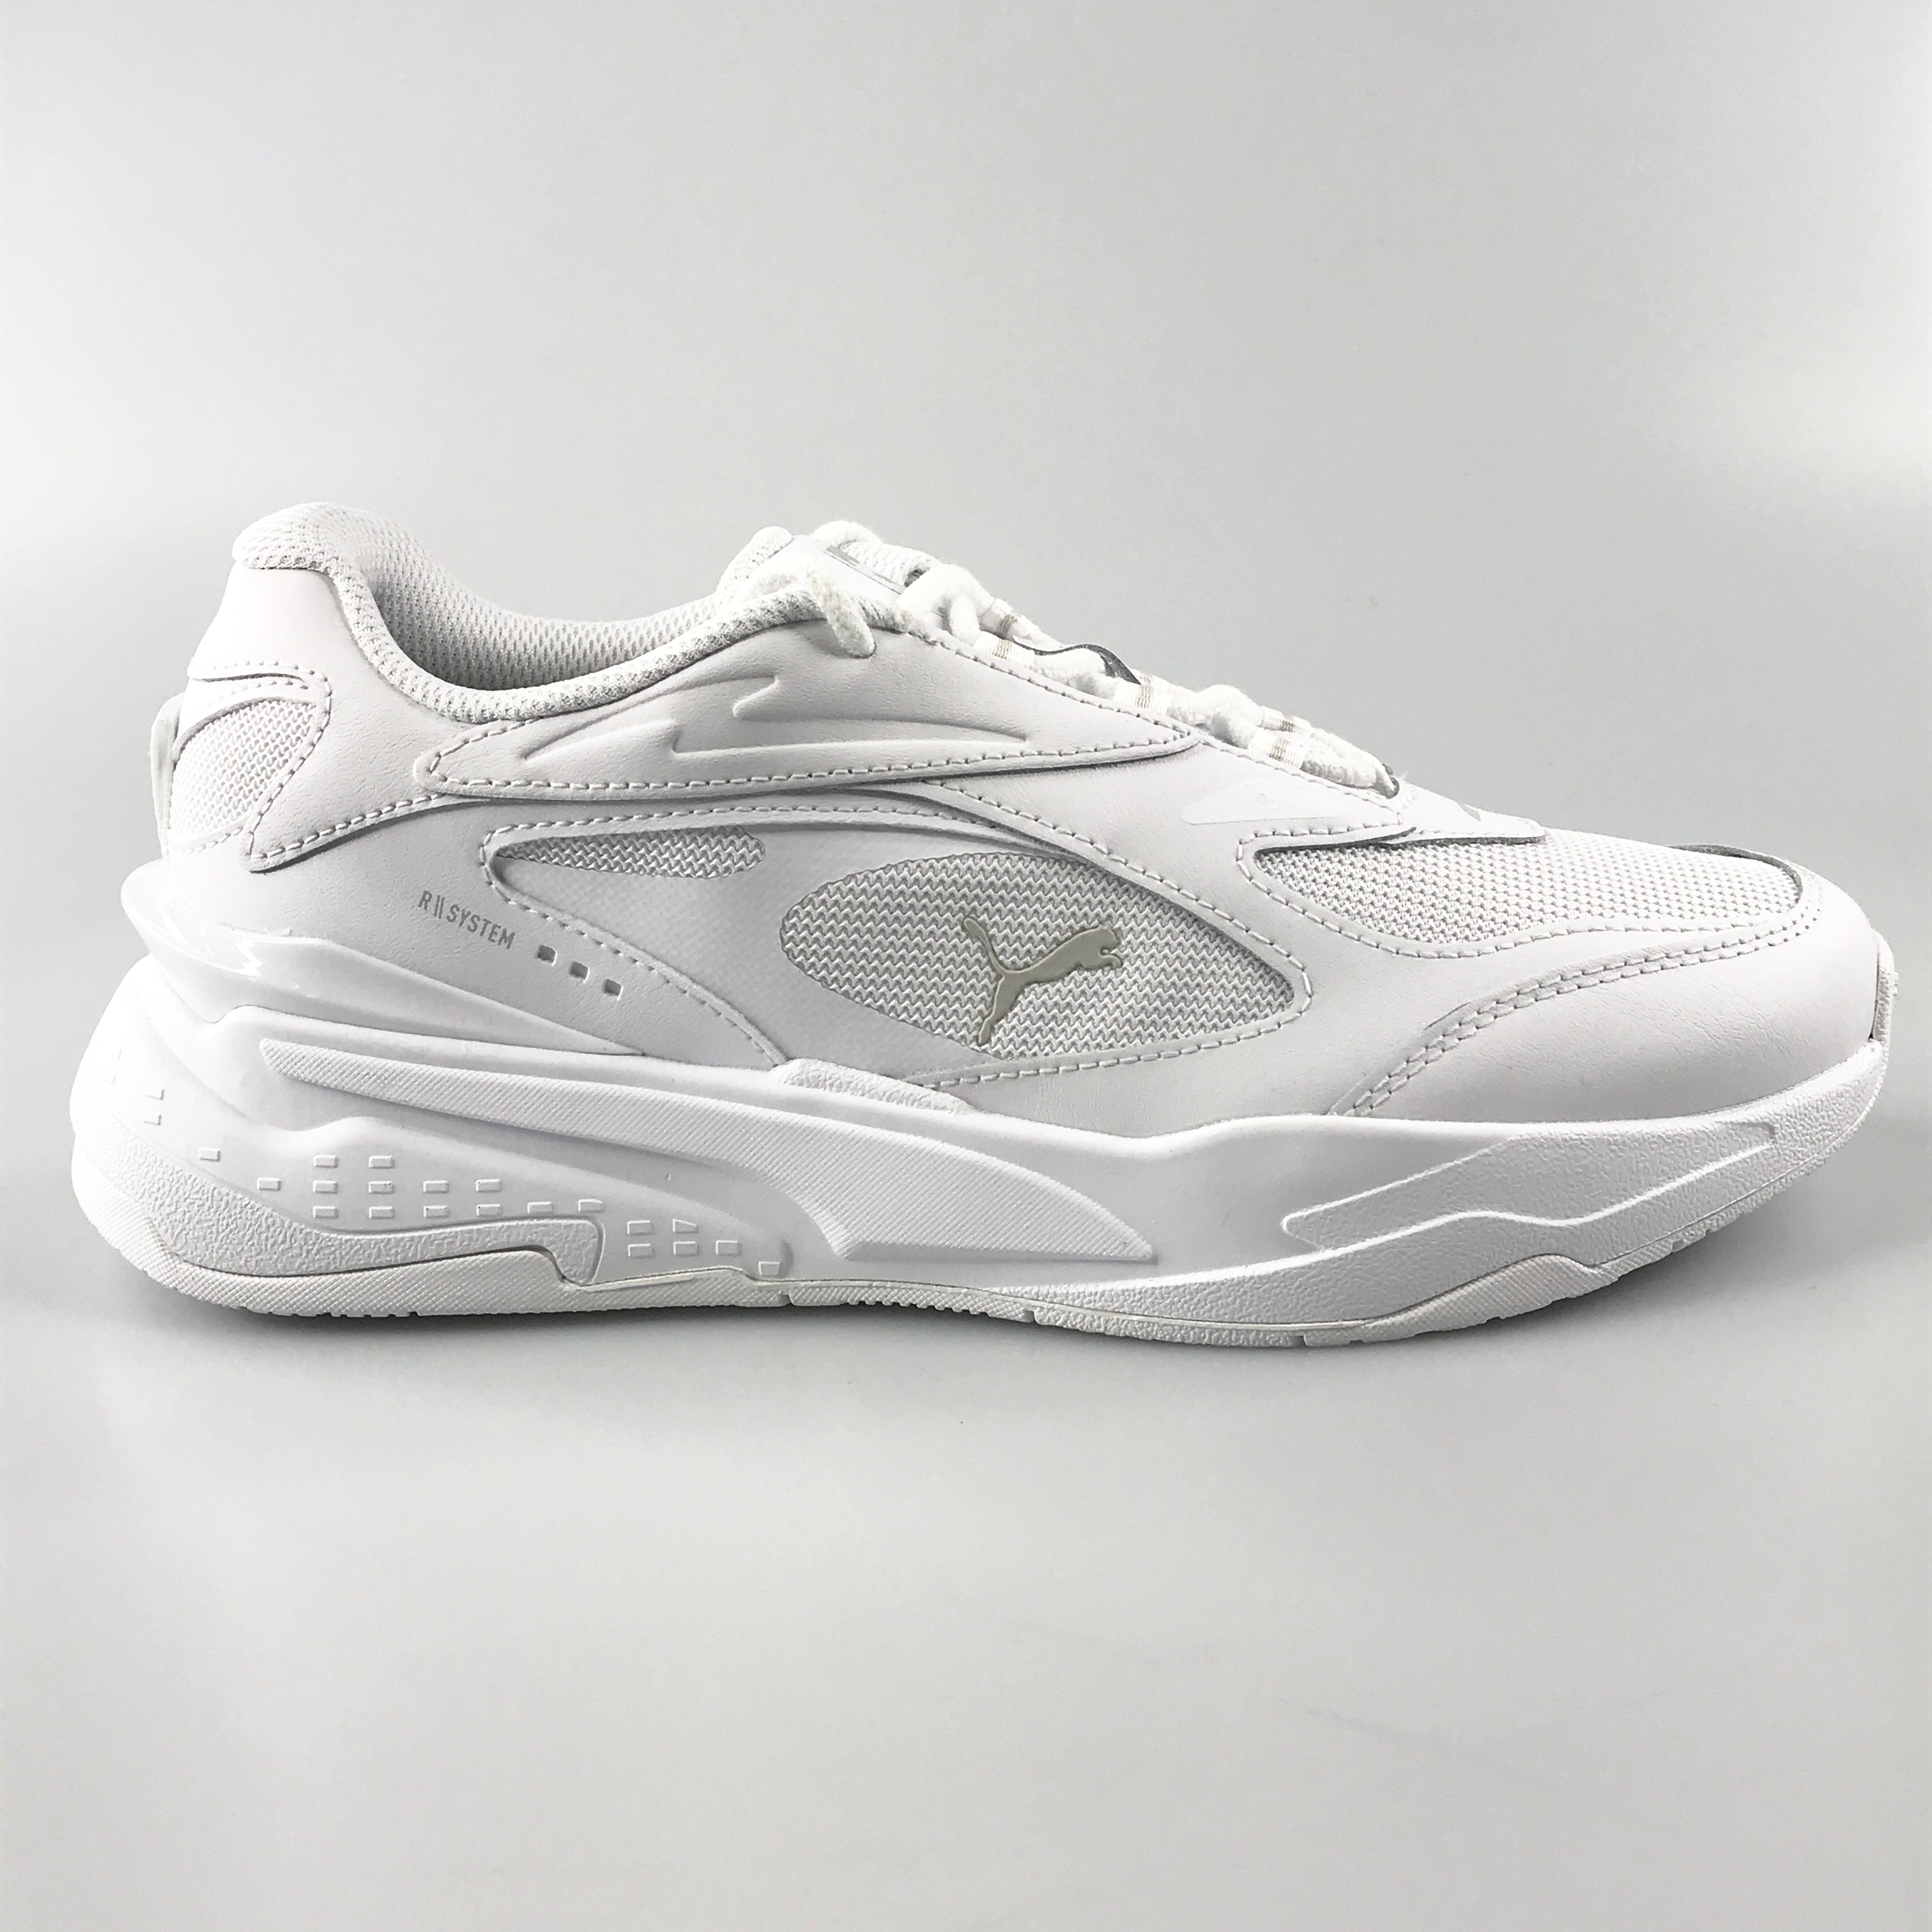 Puma RS-Fast Triple in white-gray violet